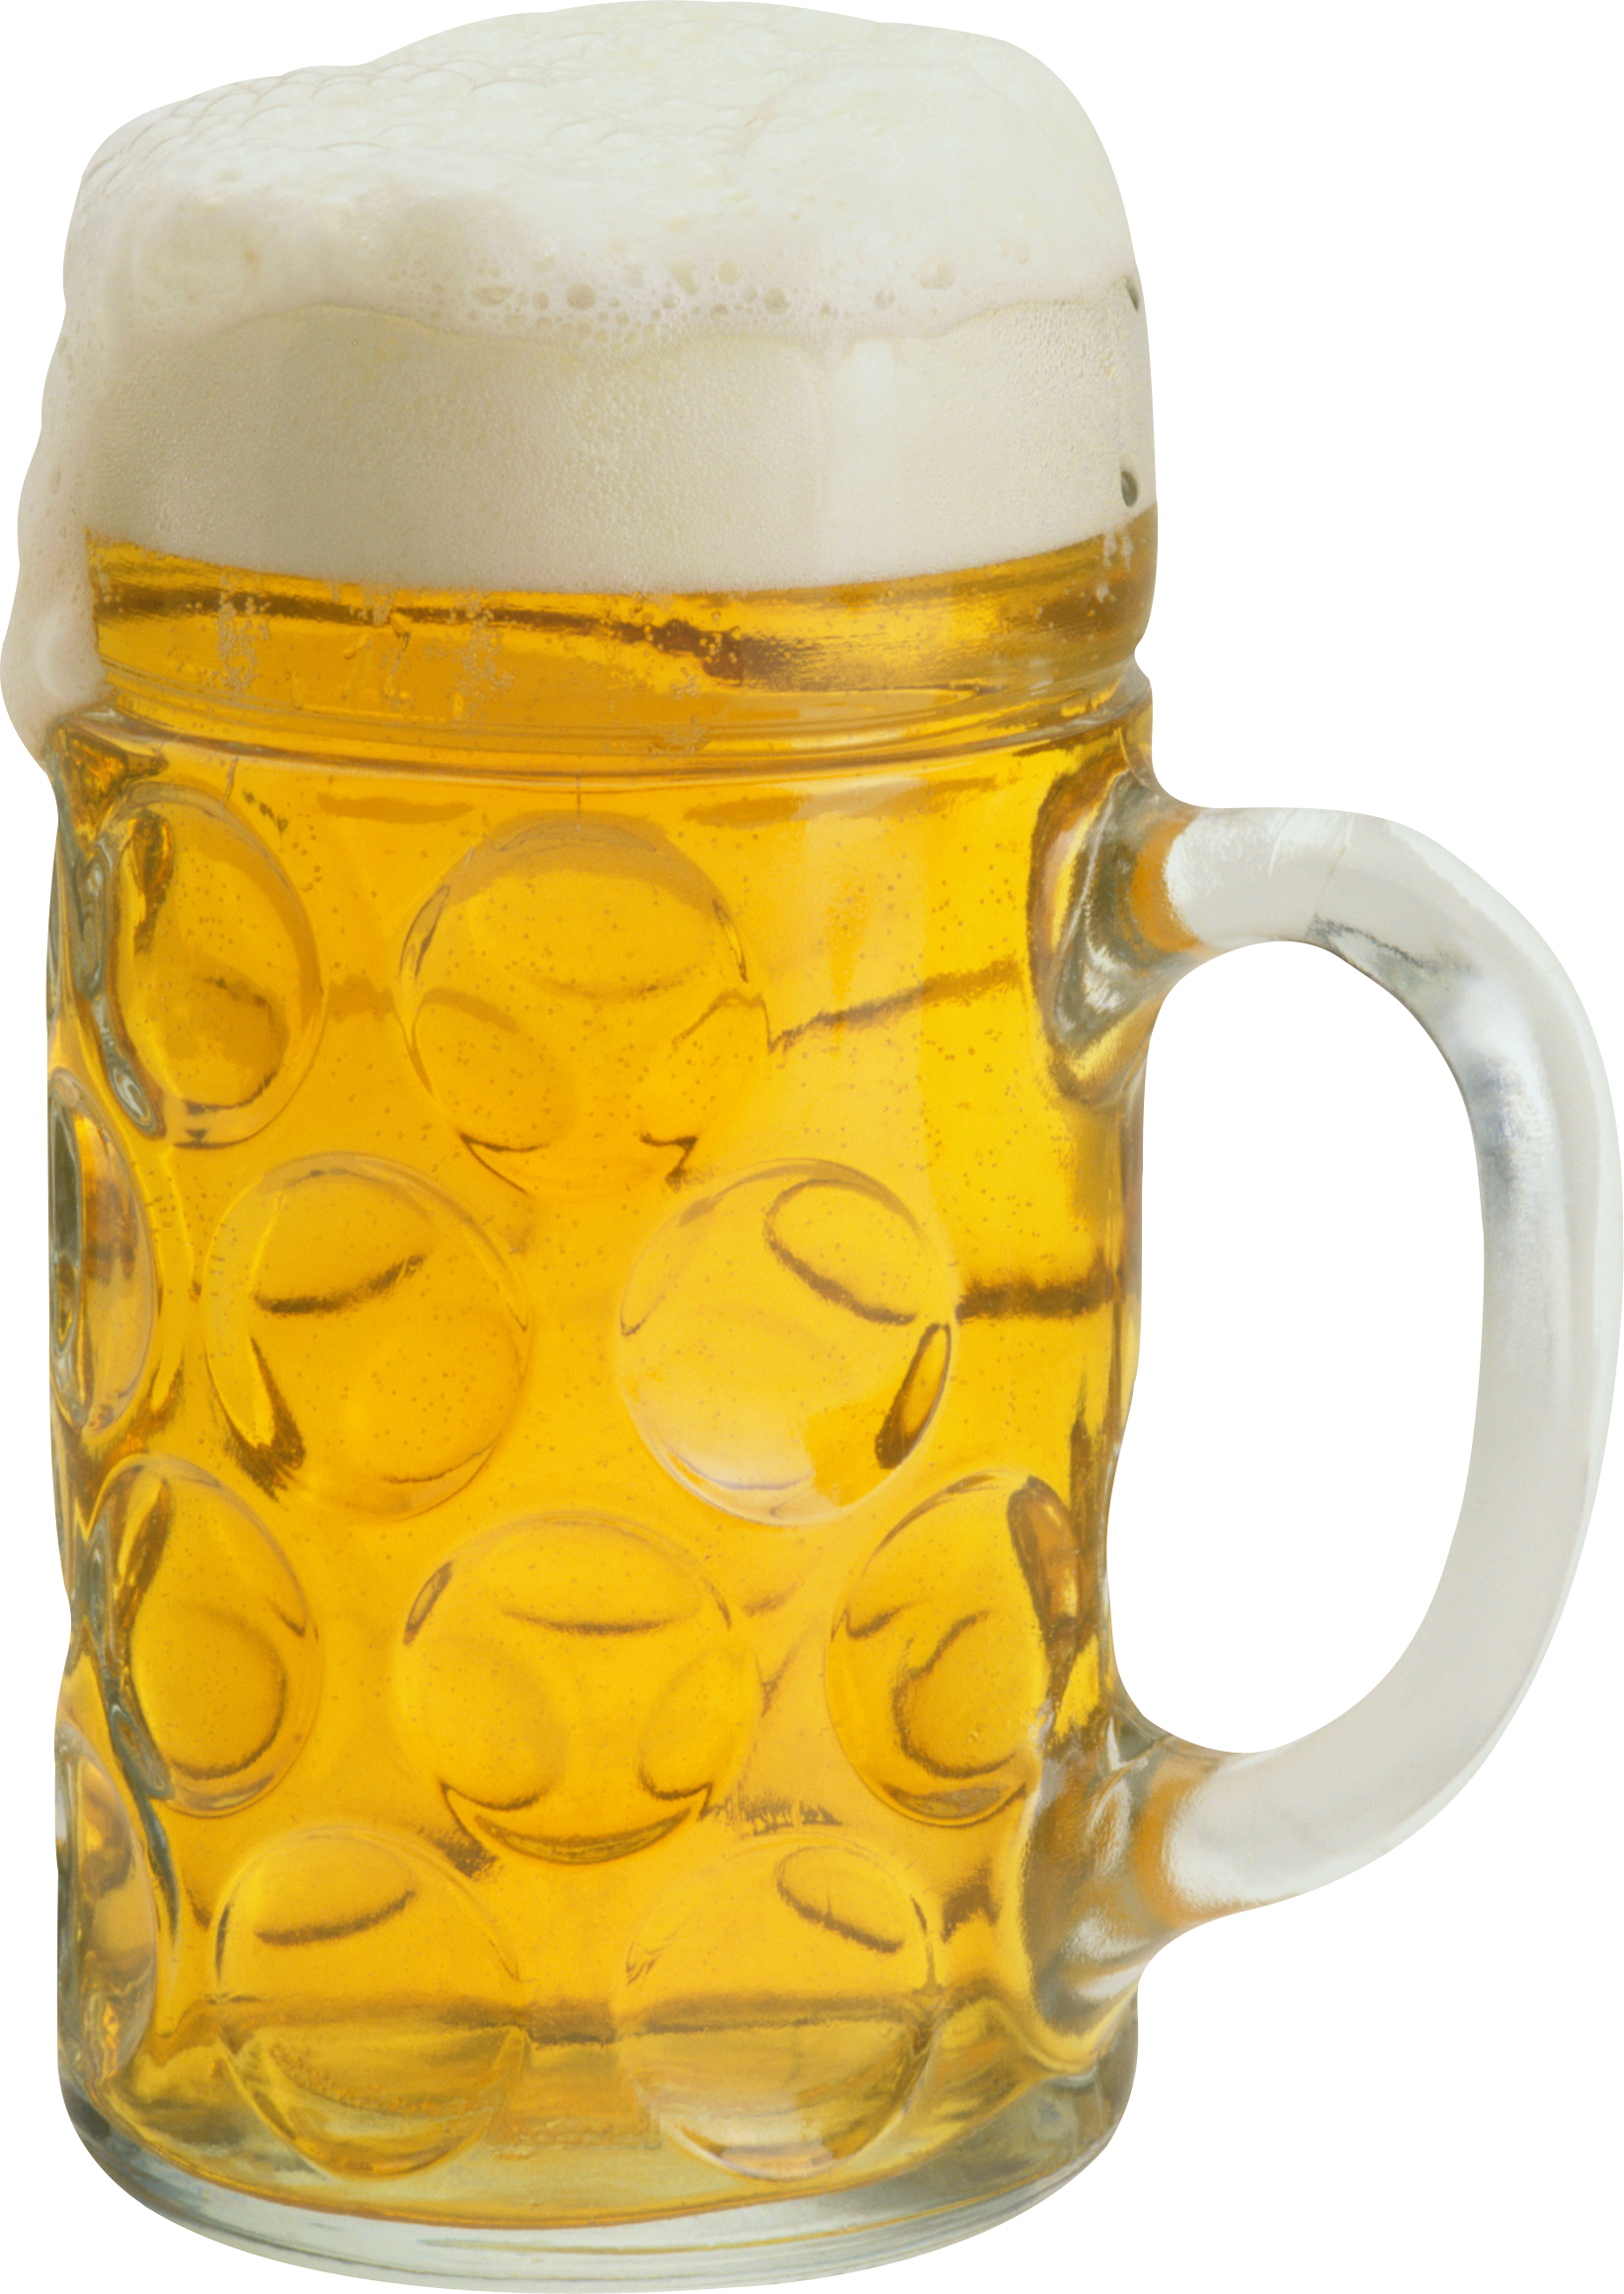 Ice Cold Beer in Mug